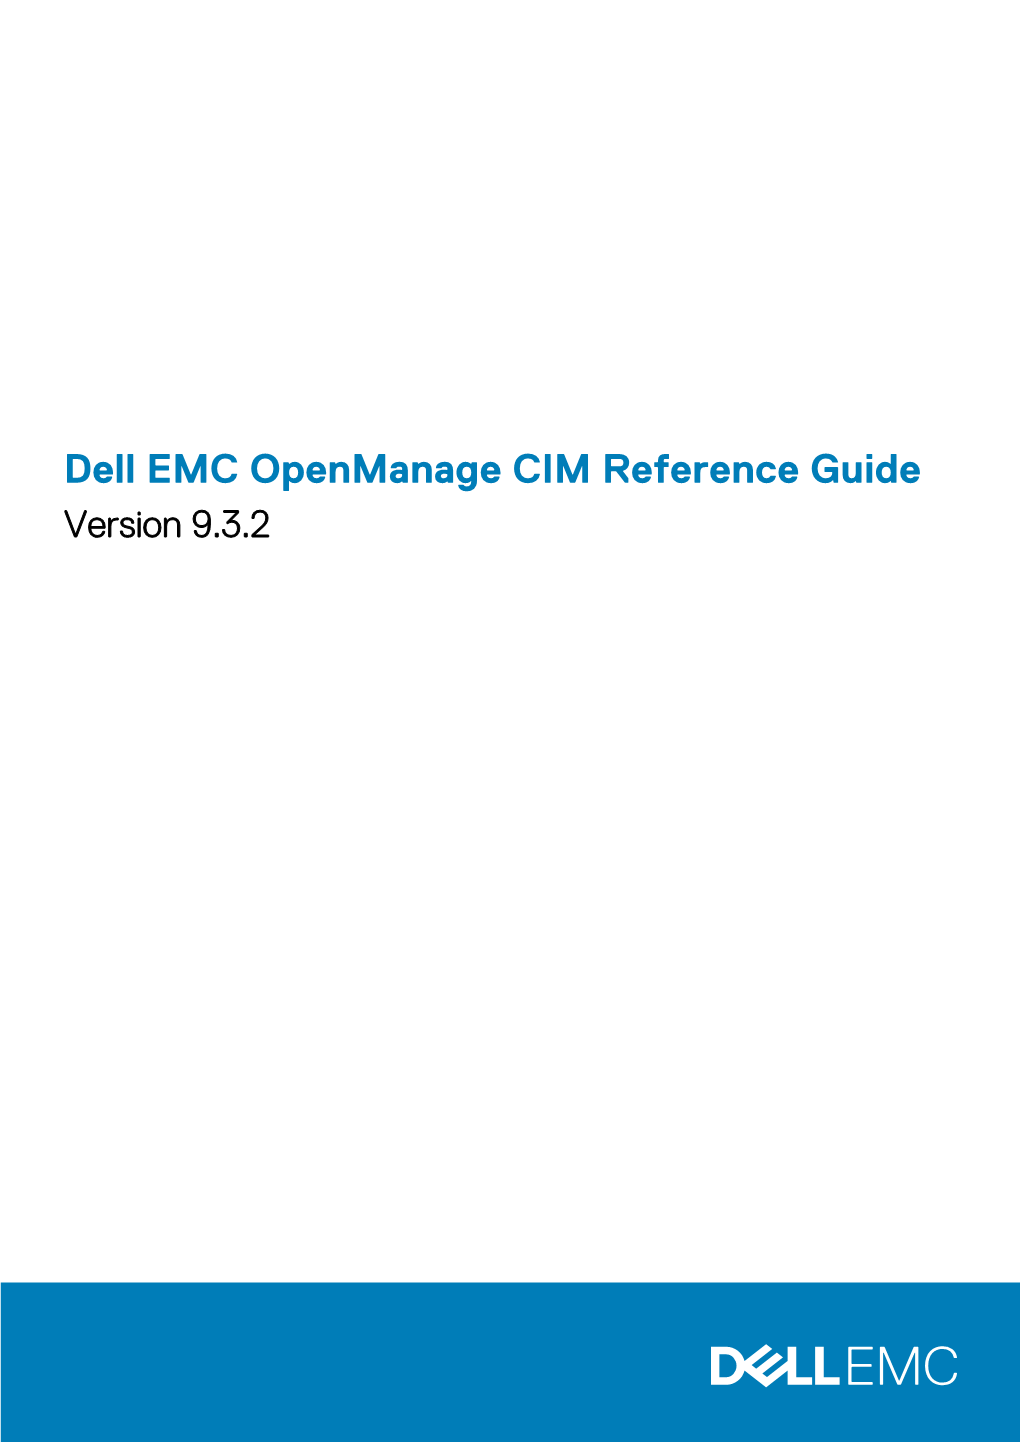 Dell EMC Openmanage CIM Reference Guide Version 9.3.2 Notes, Cautions, and Warnings